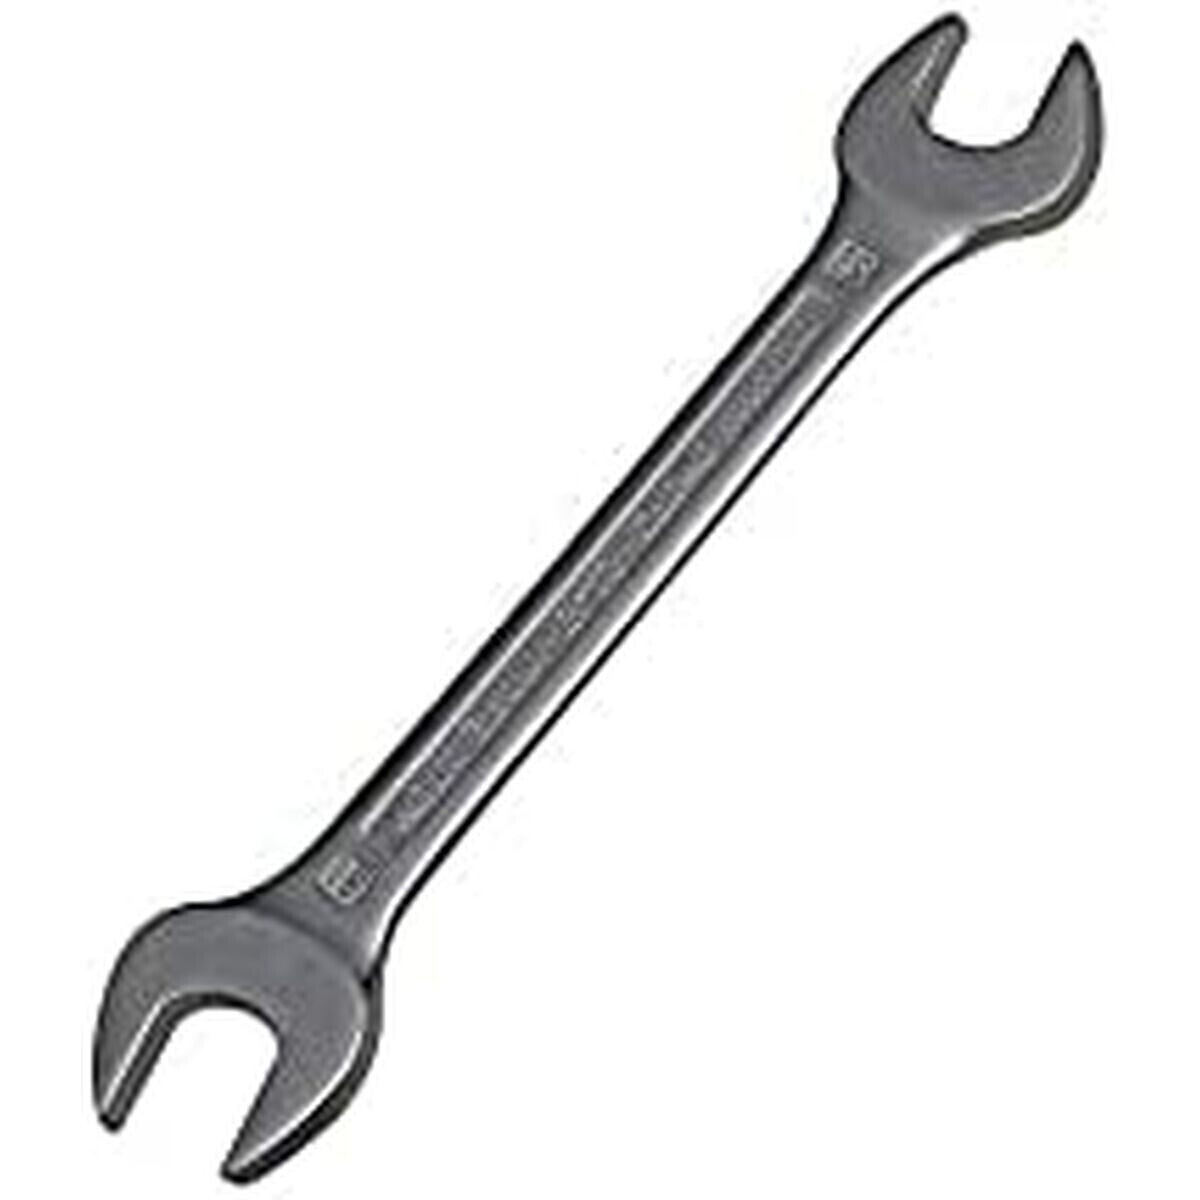 Fixed head open ended wrench Mota 21 x 23 mm